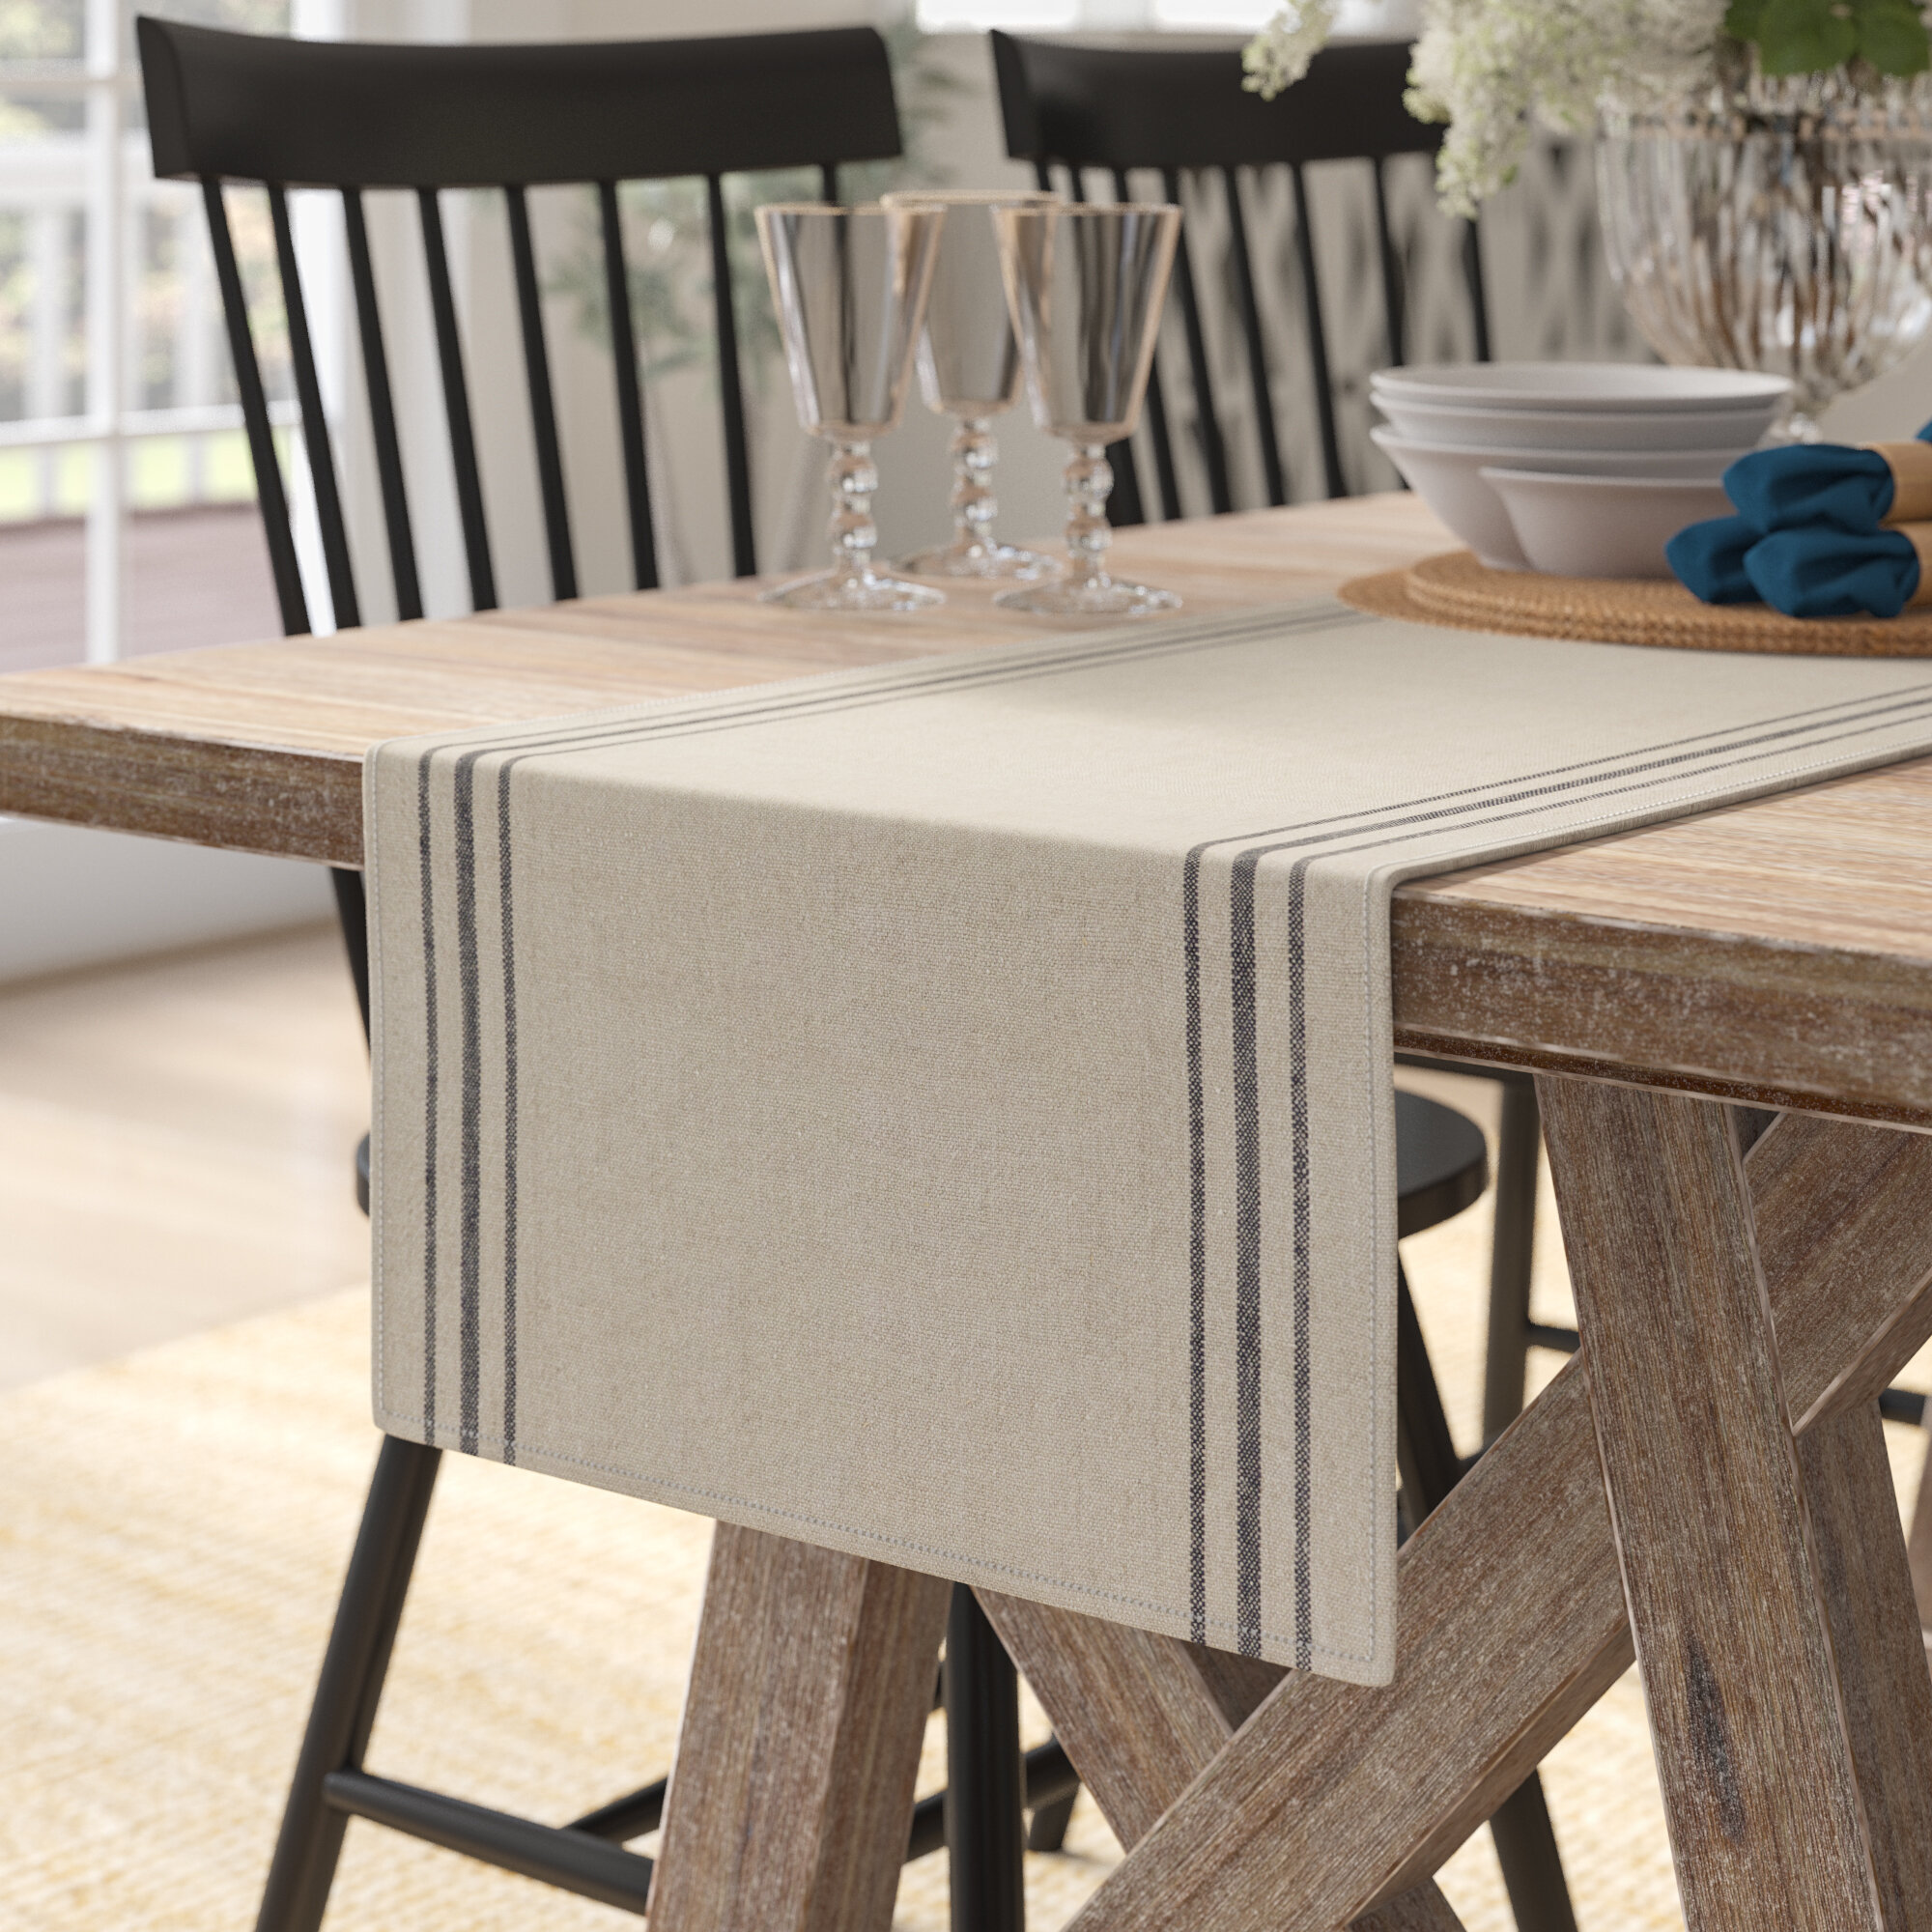 Three Posts Pateley Striped Linen Table Runner Reviews